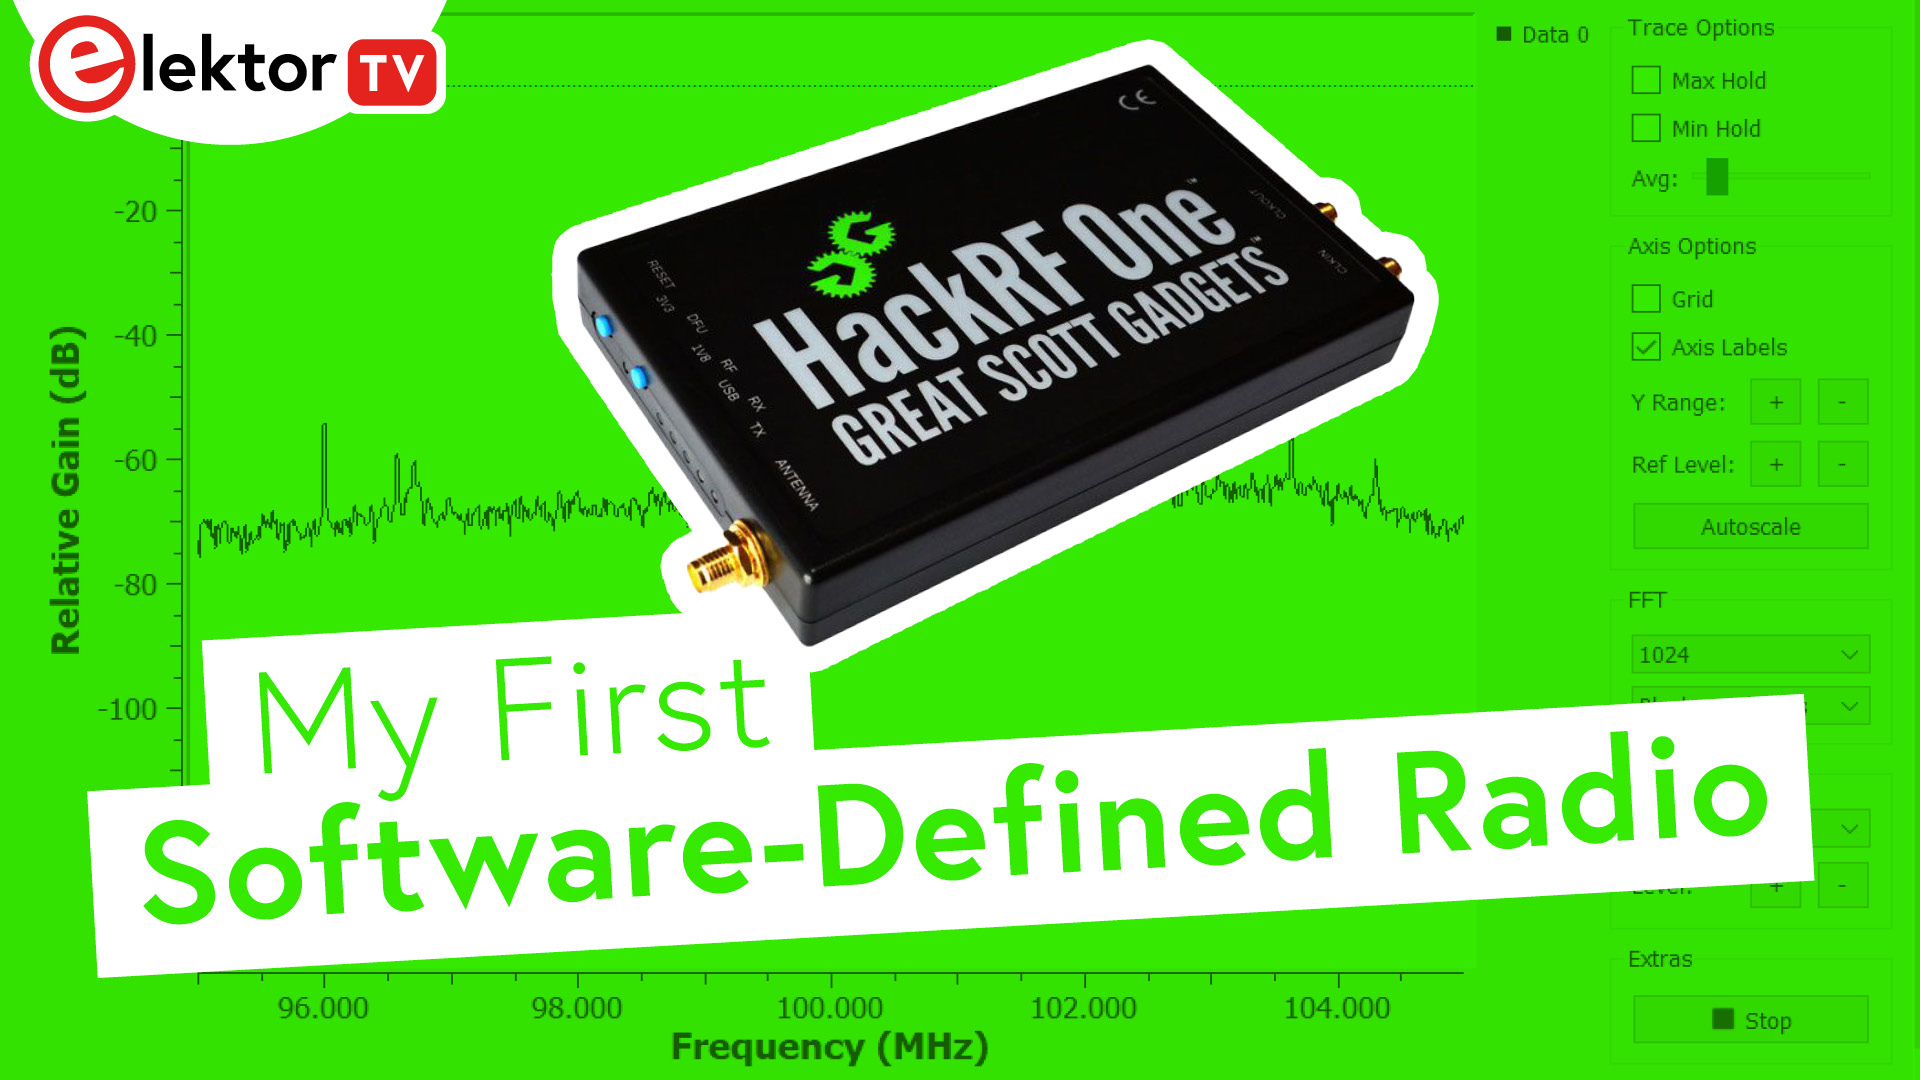 A Software-Defined Radio (SDR), 2019 Latest 1MHz-6GHz SDR Platform Software  Defined Radio Development Card with Metal Shell